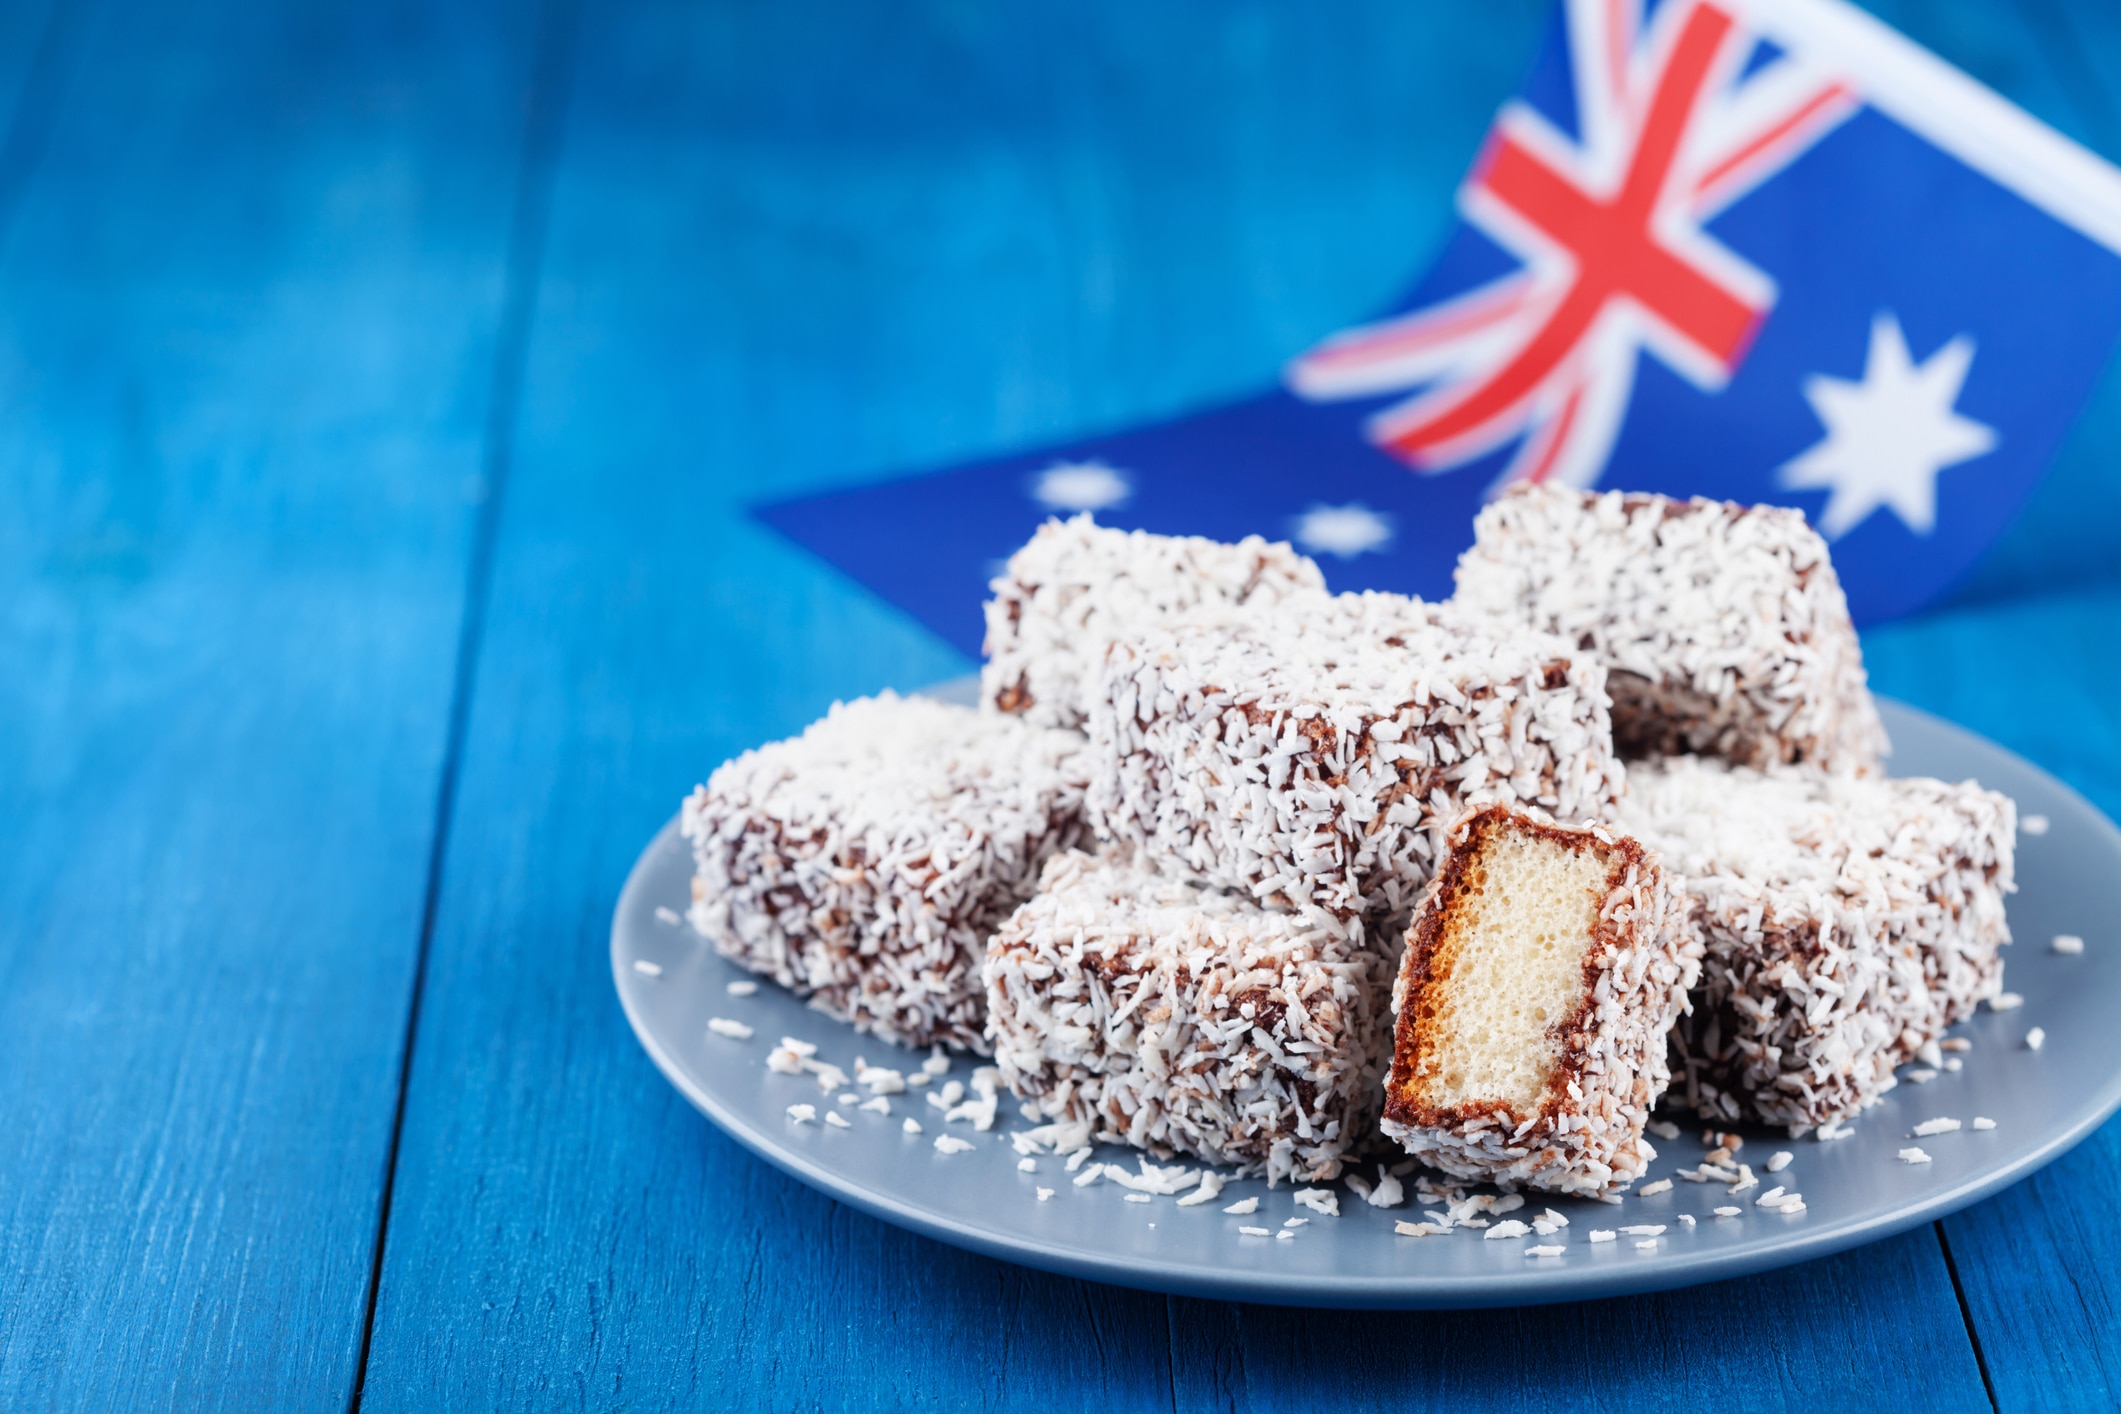 Traditional Lamington cakes or dessert for Australia Day party.